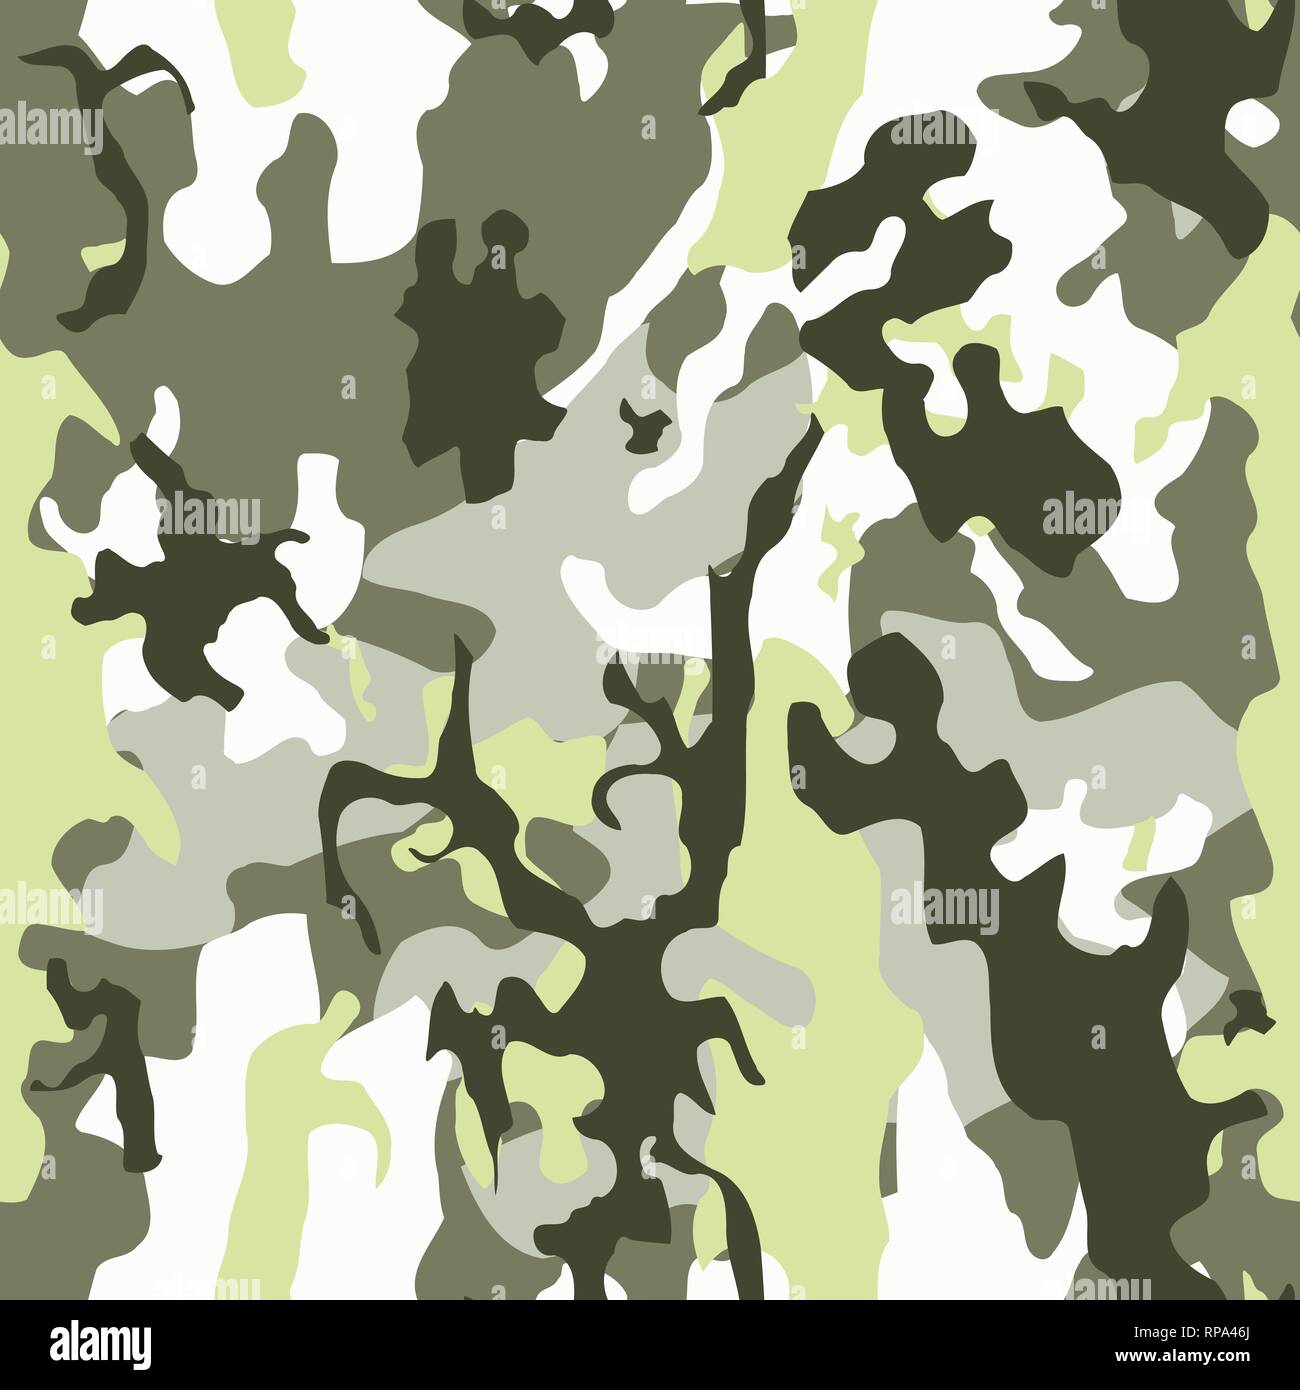 Army camo vector - seamless camouflage texture. Military fashion style. Stock Vector